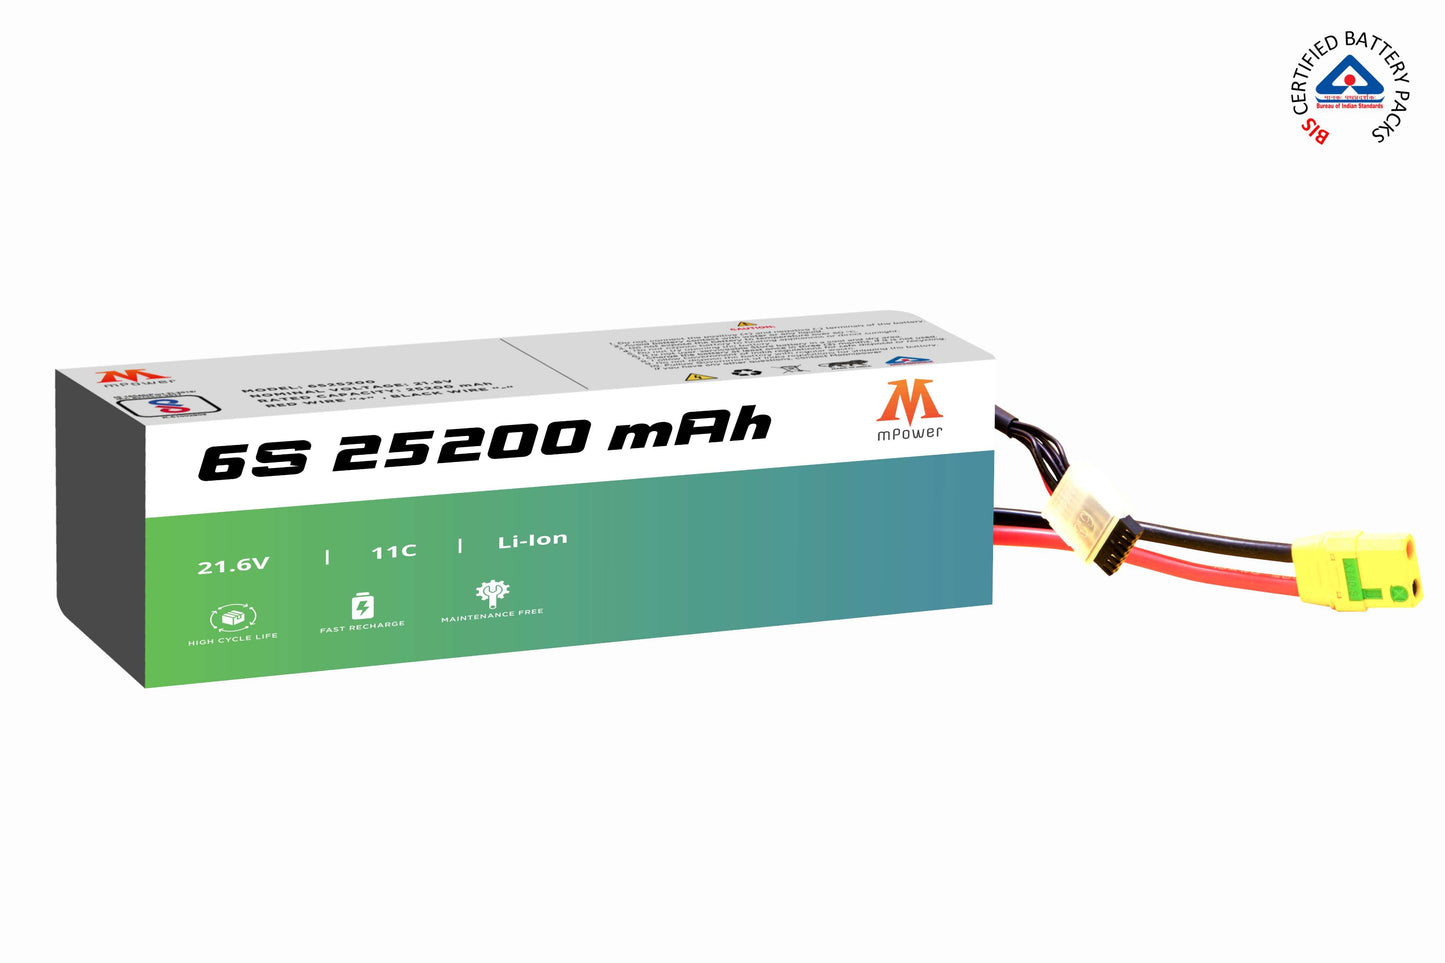 mPower 6S 25200mAh Lithium-Ion Battery for Delivery Drones-mpowerlithium